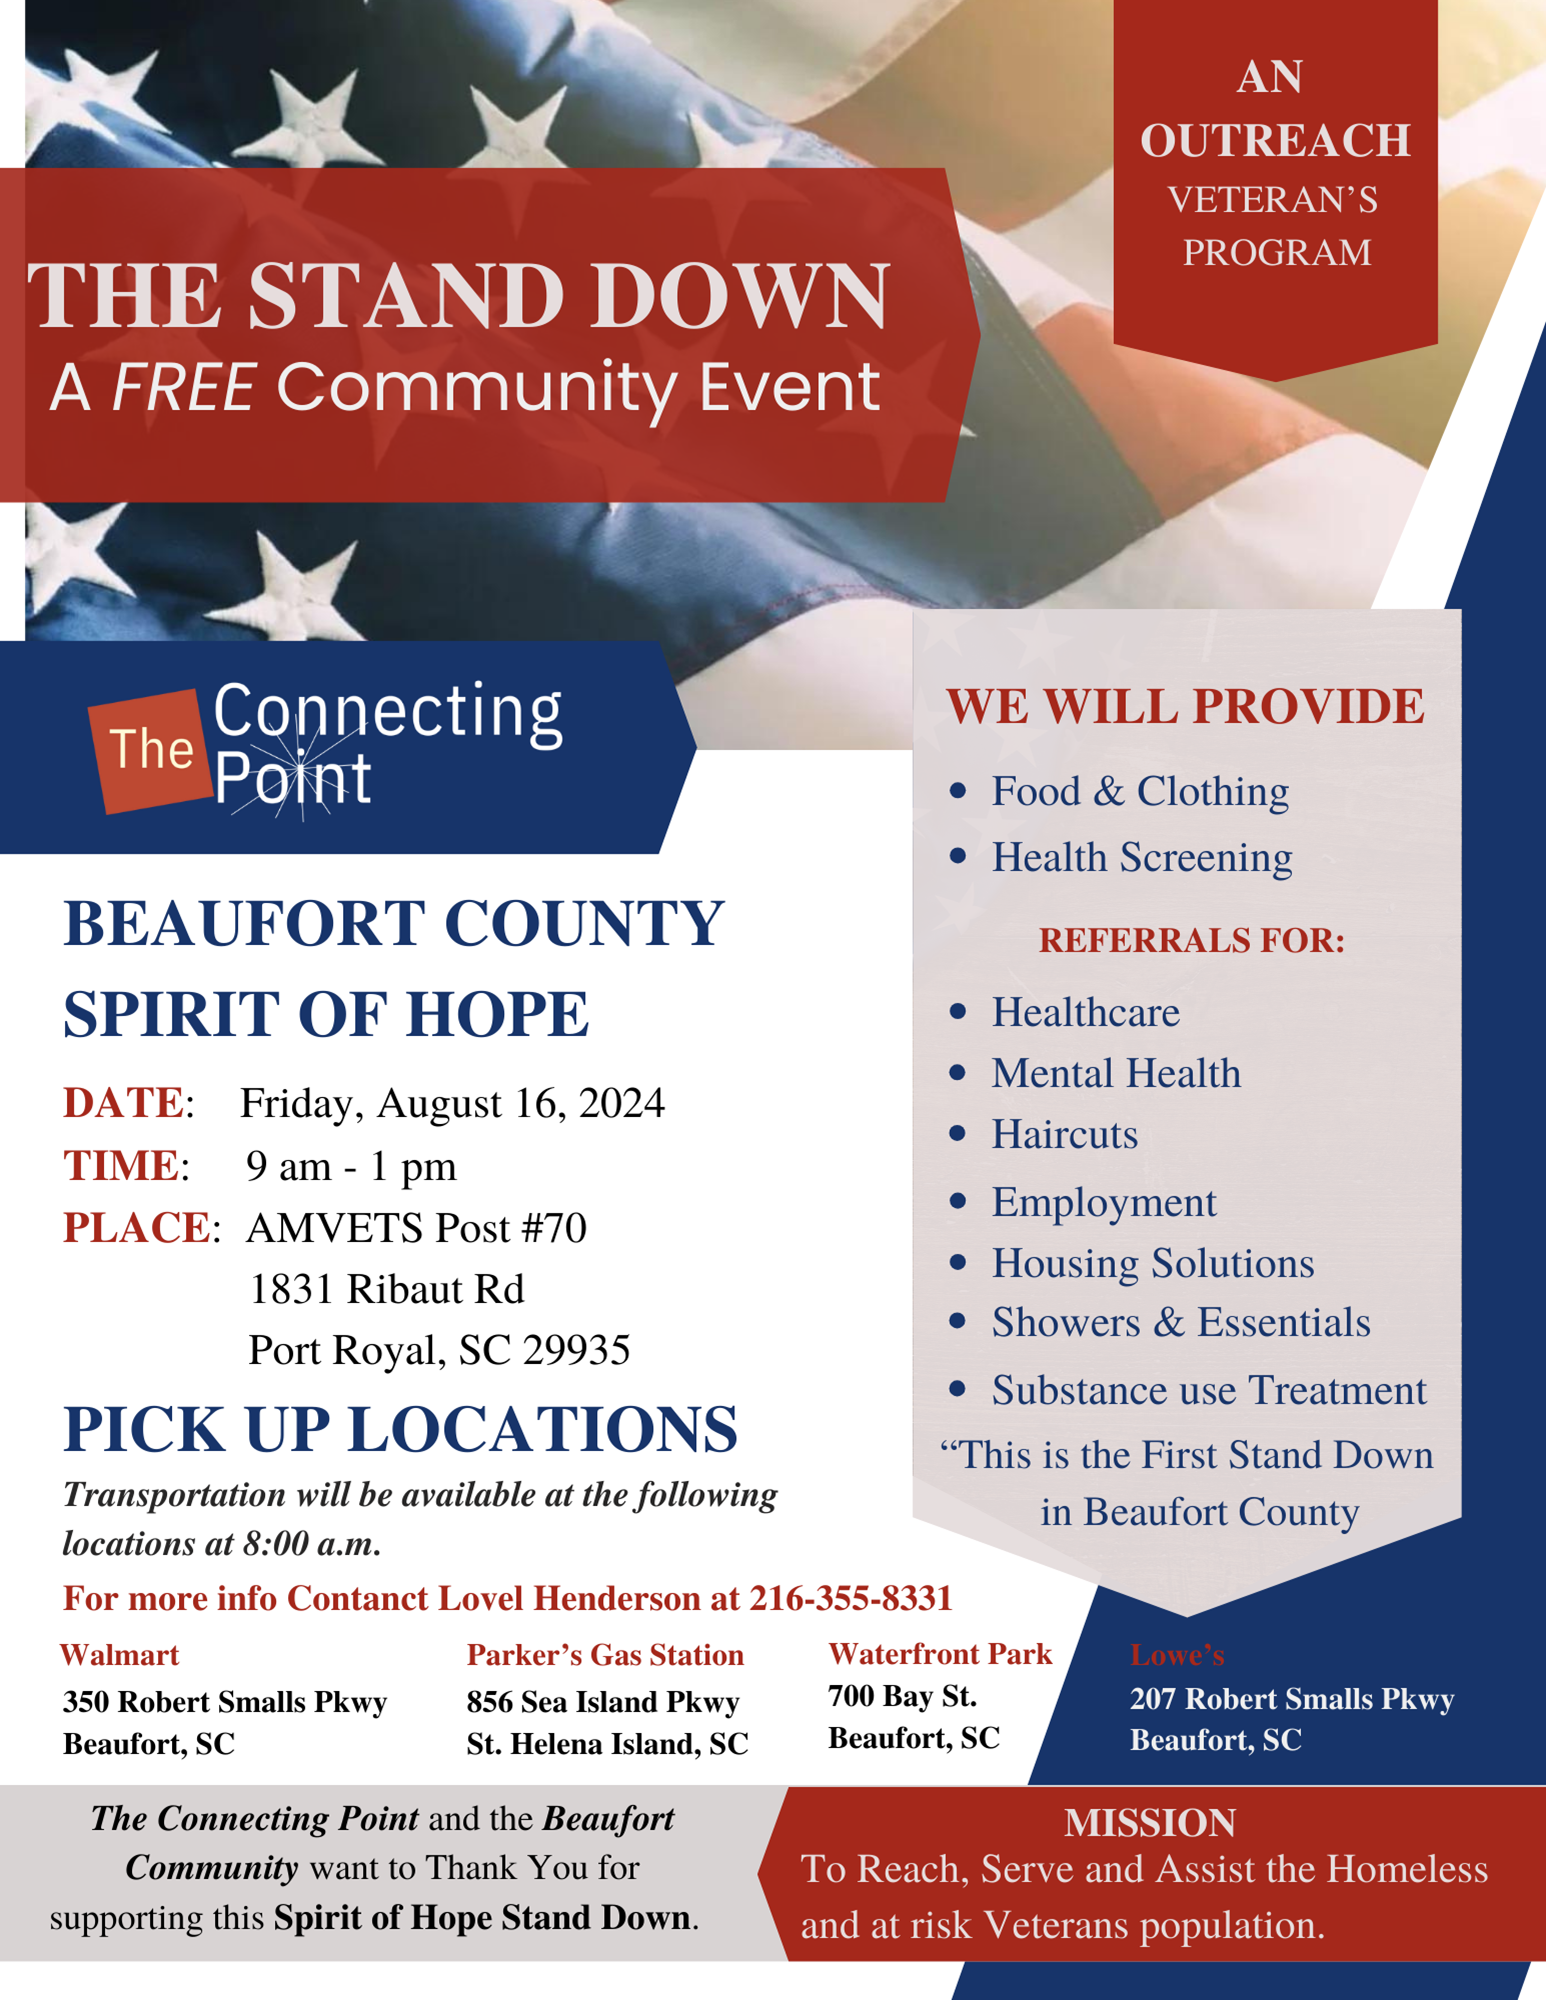 Beaufort County Stand Down event